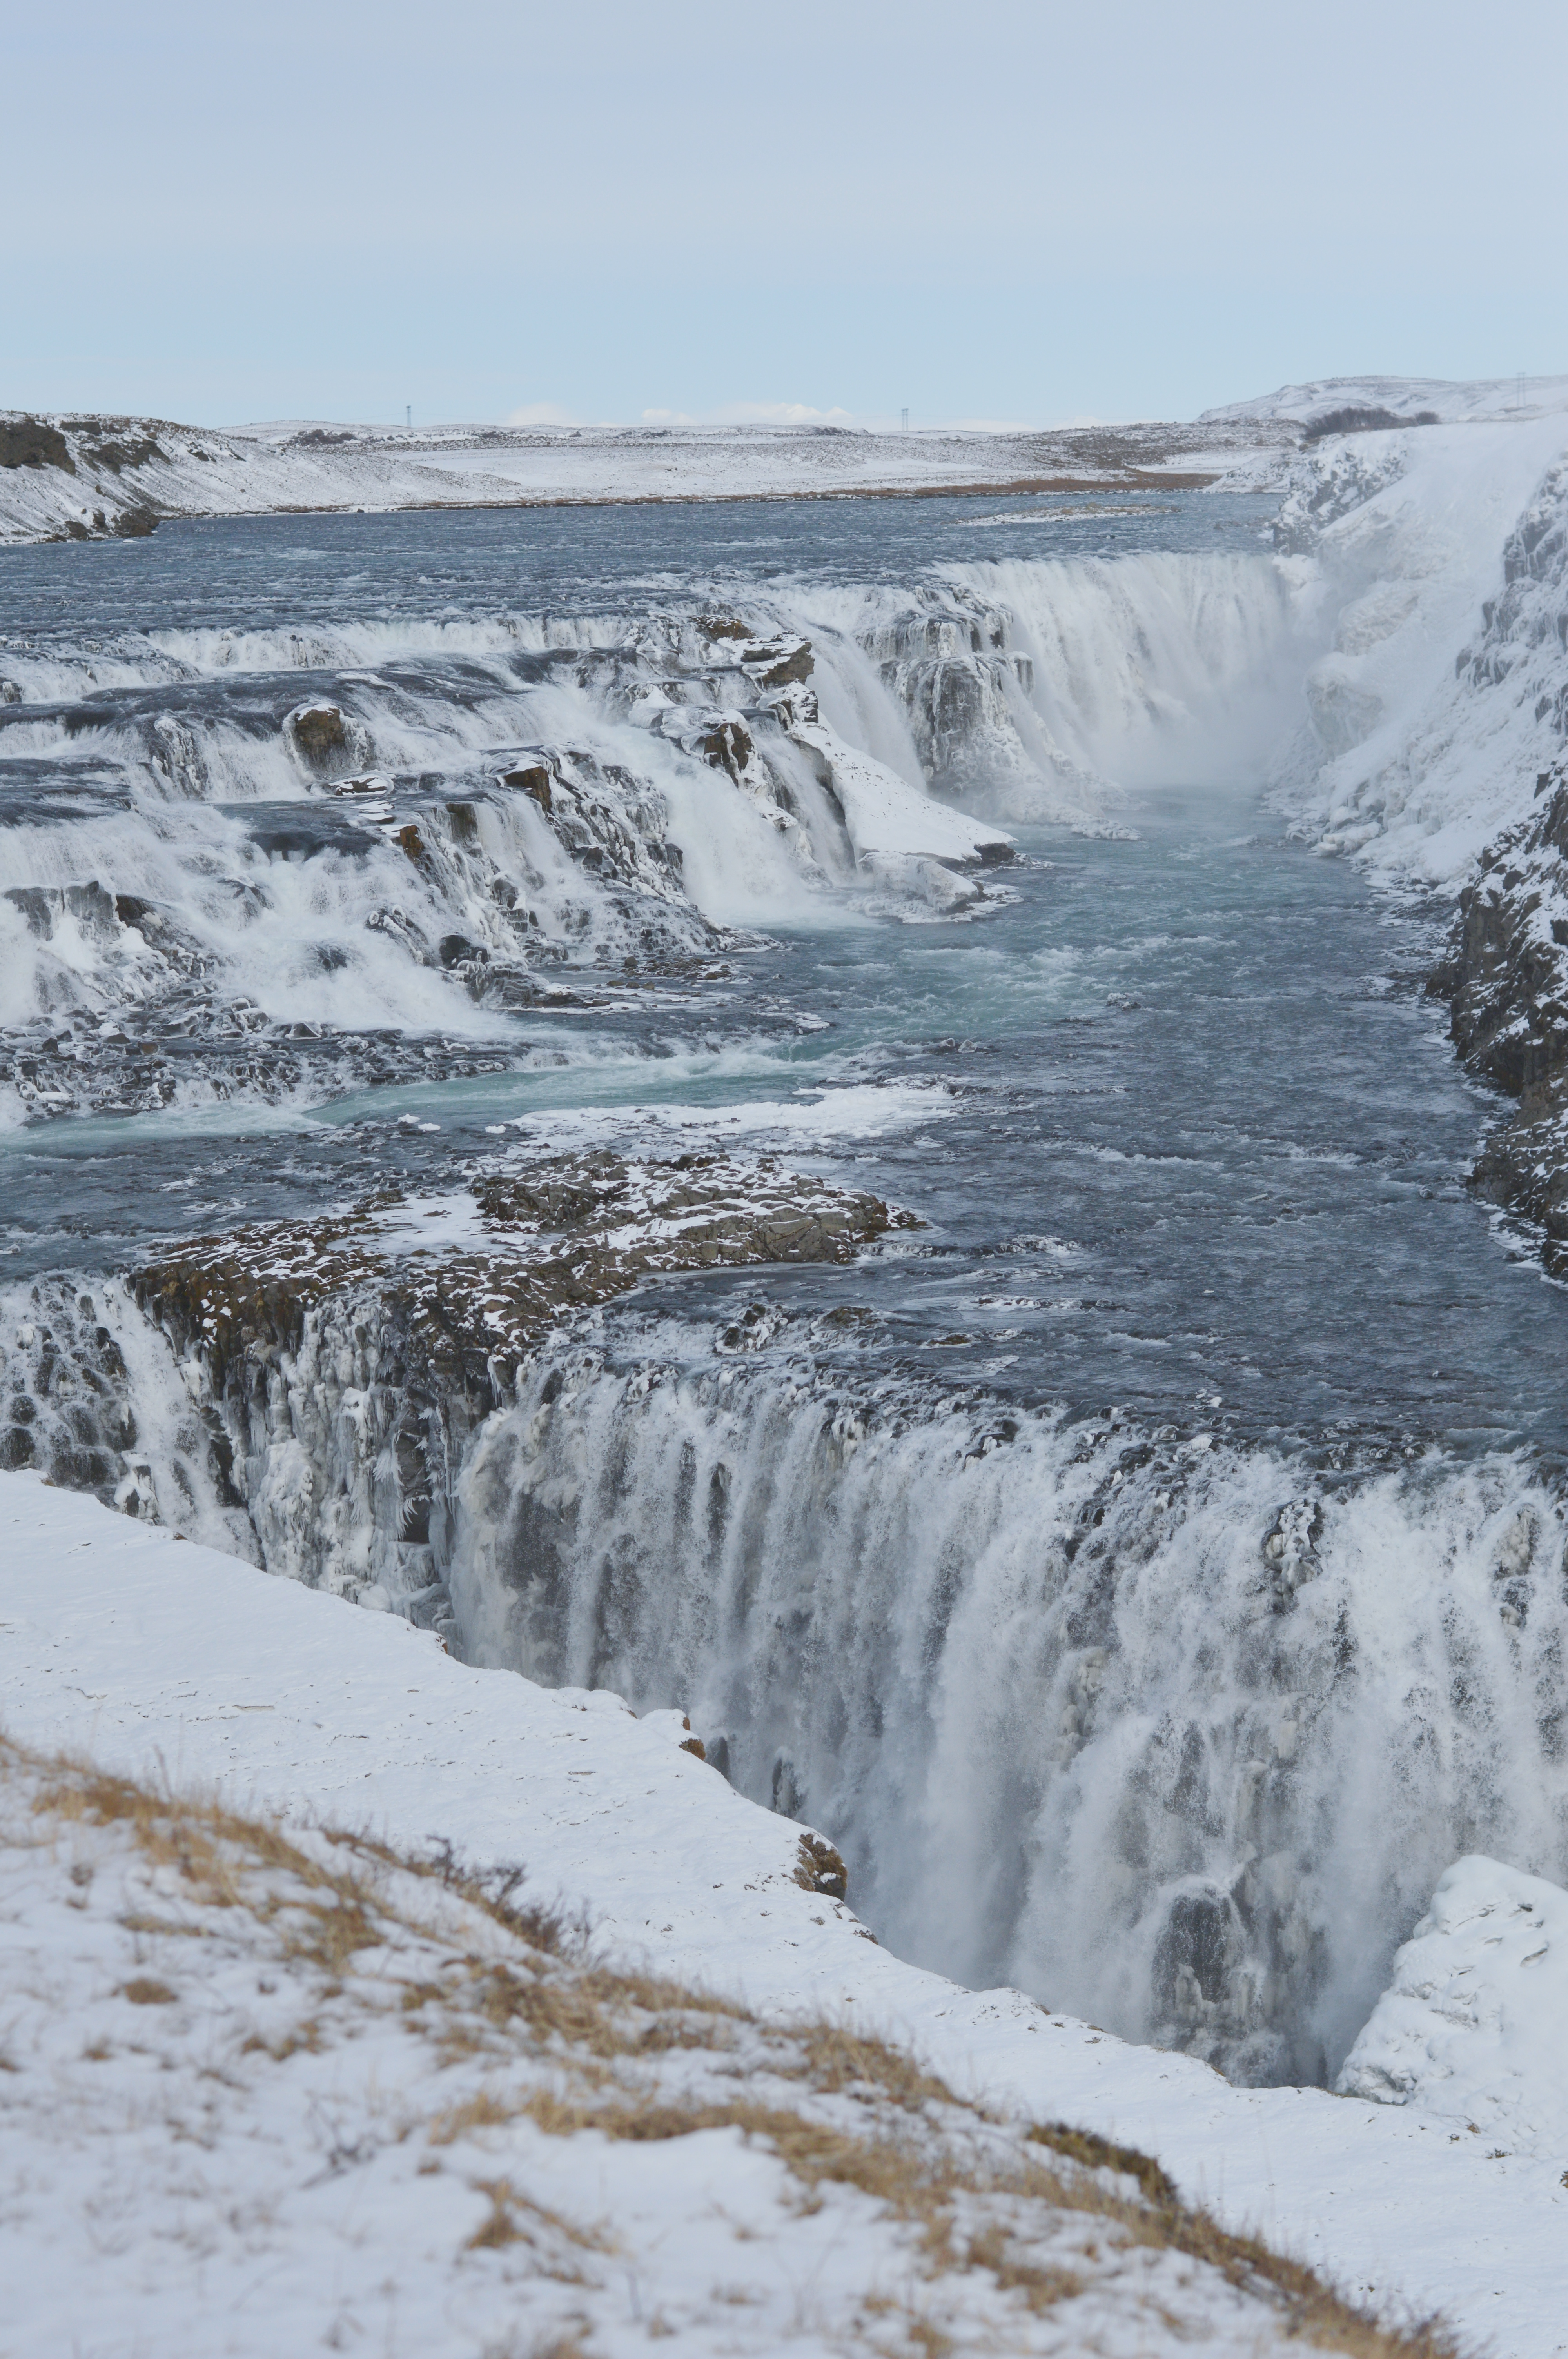 The Gulfoss Waterfall in Iceland's Golden Circle4